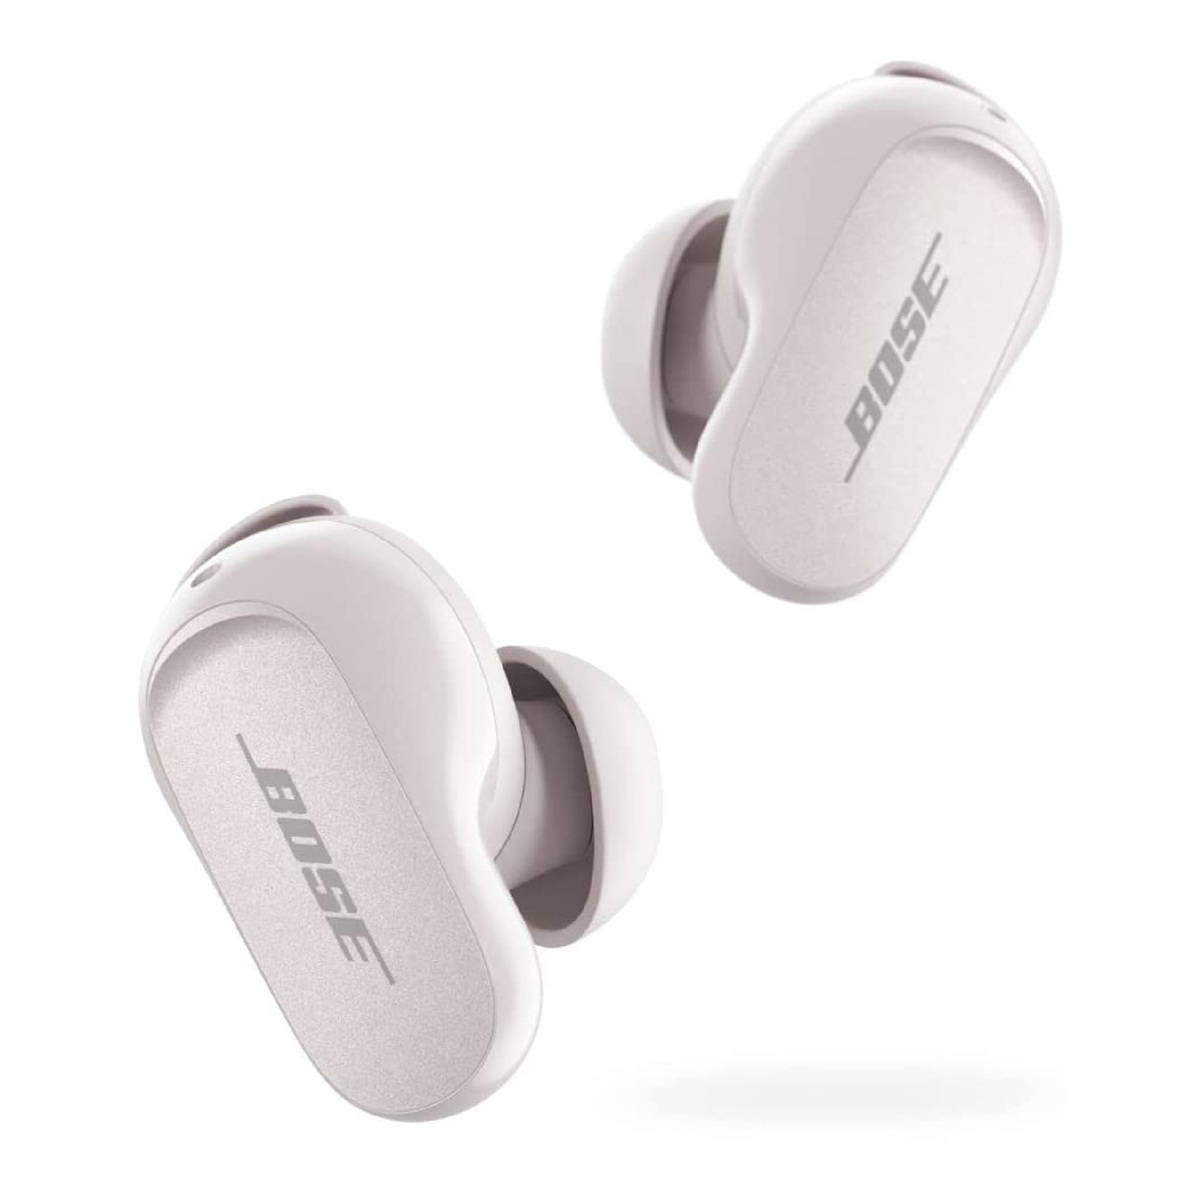 Bose QuietComfort Earbuds: Price, Release Date, and Pre-Order